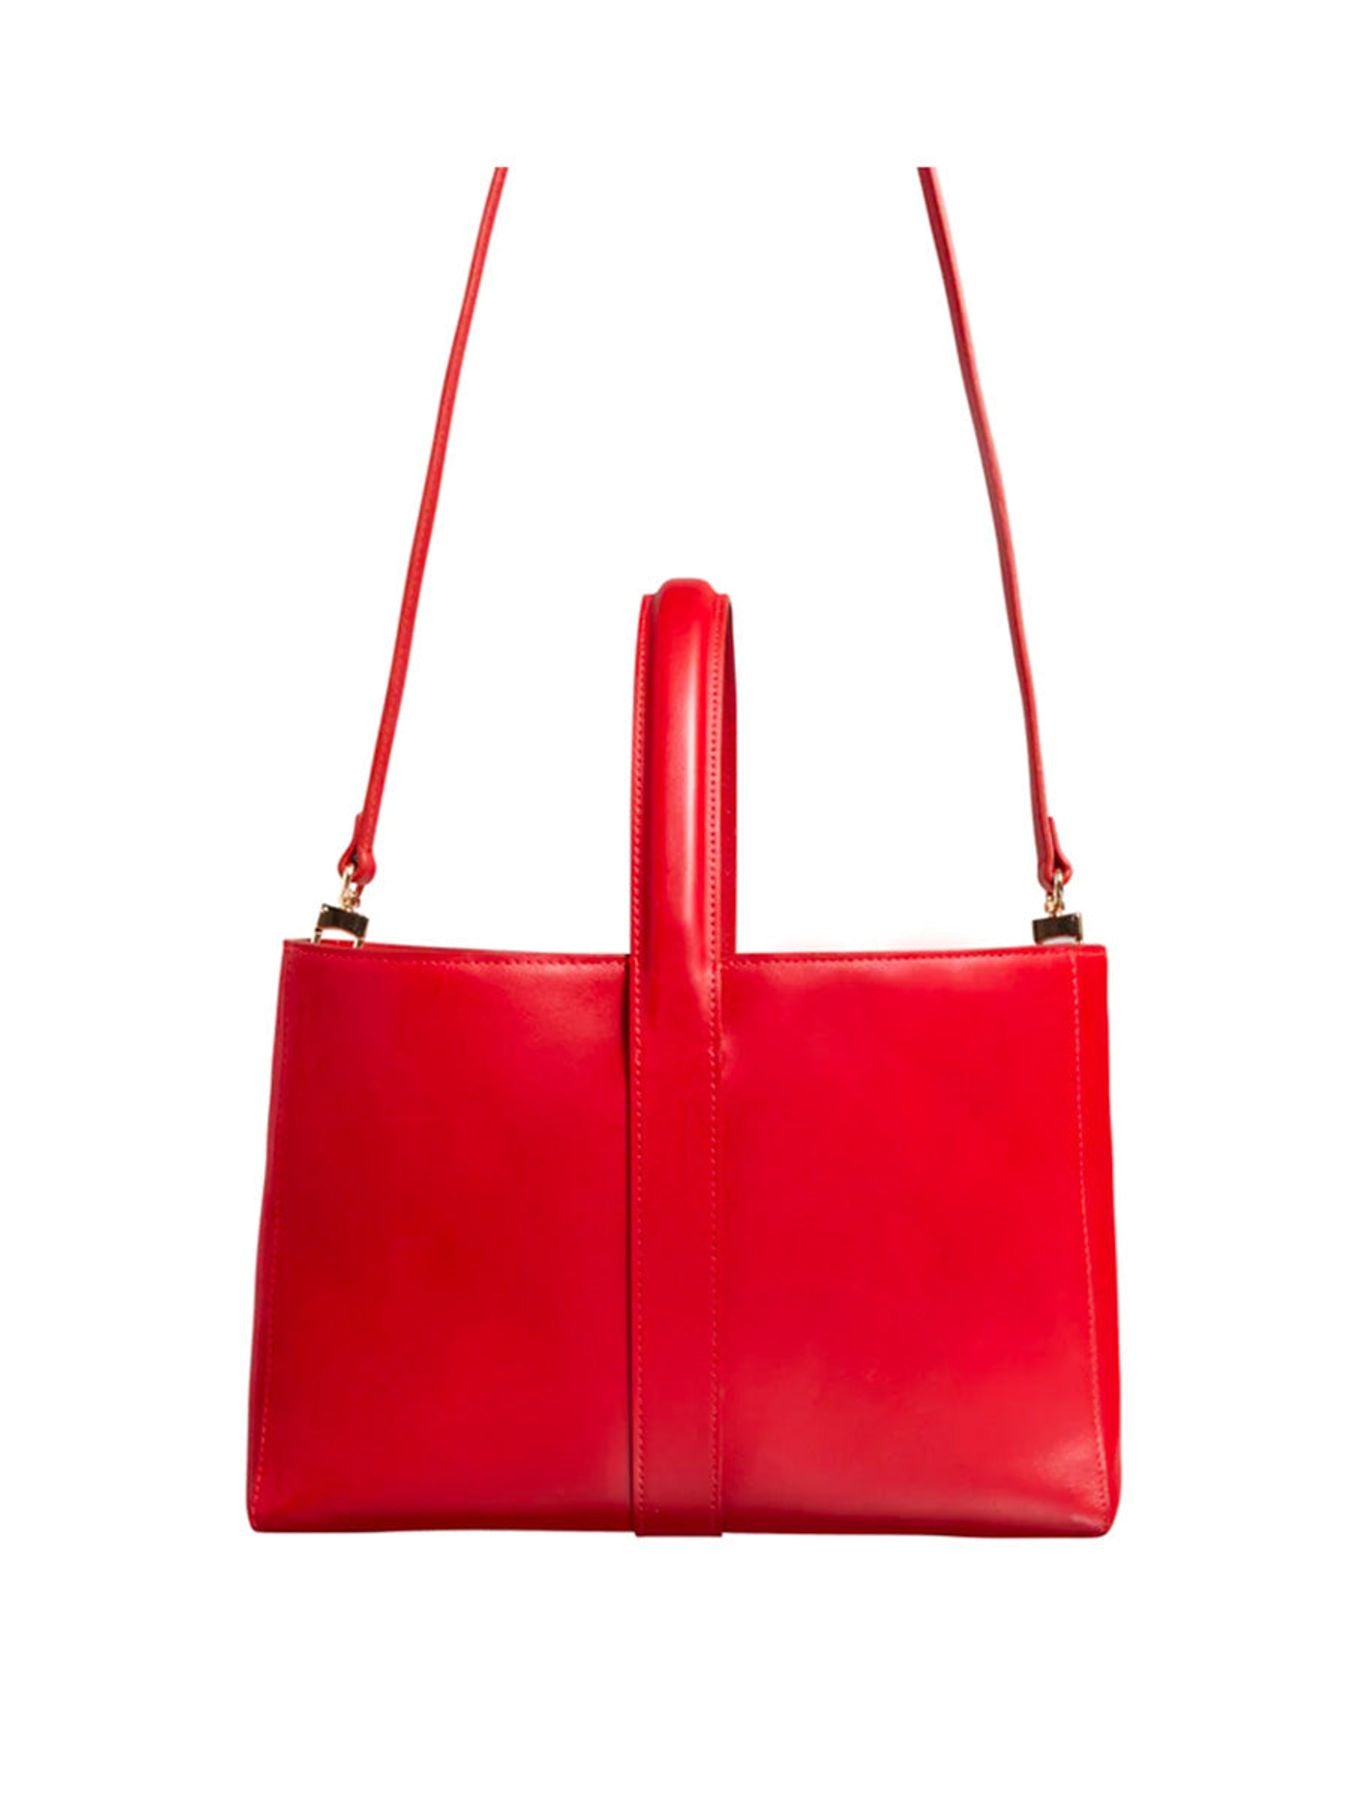 bag-leonore-s-cuir-red